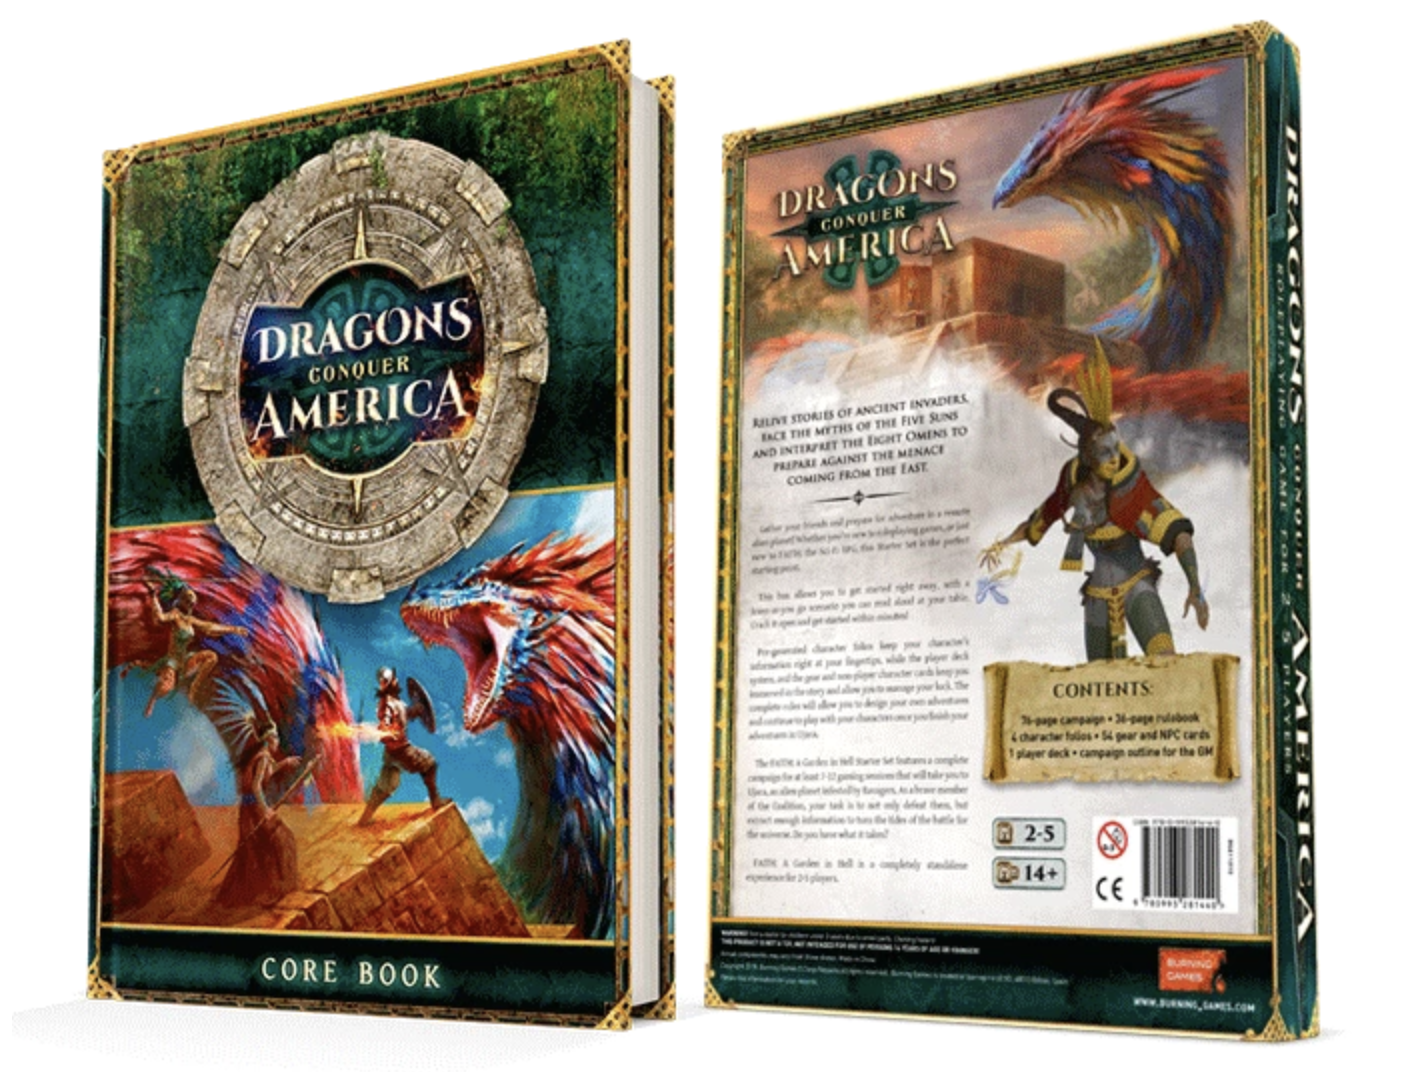 Dragons Conquer America final cover art revealed!